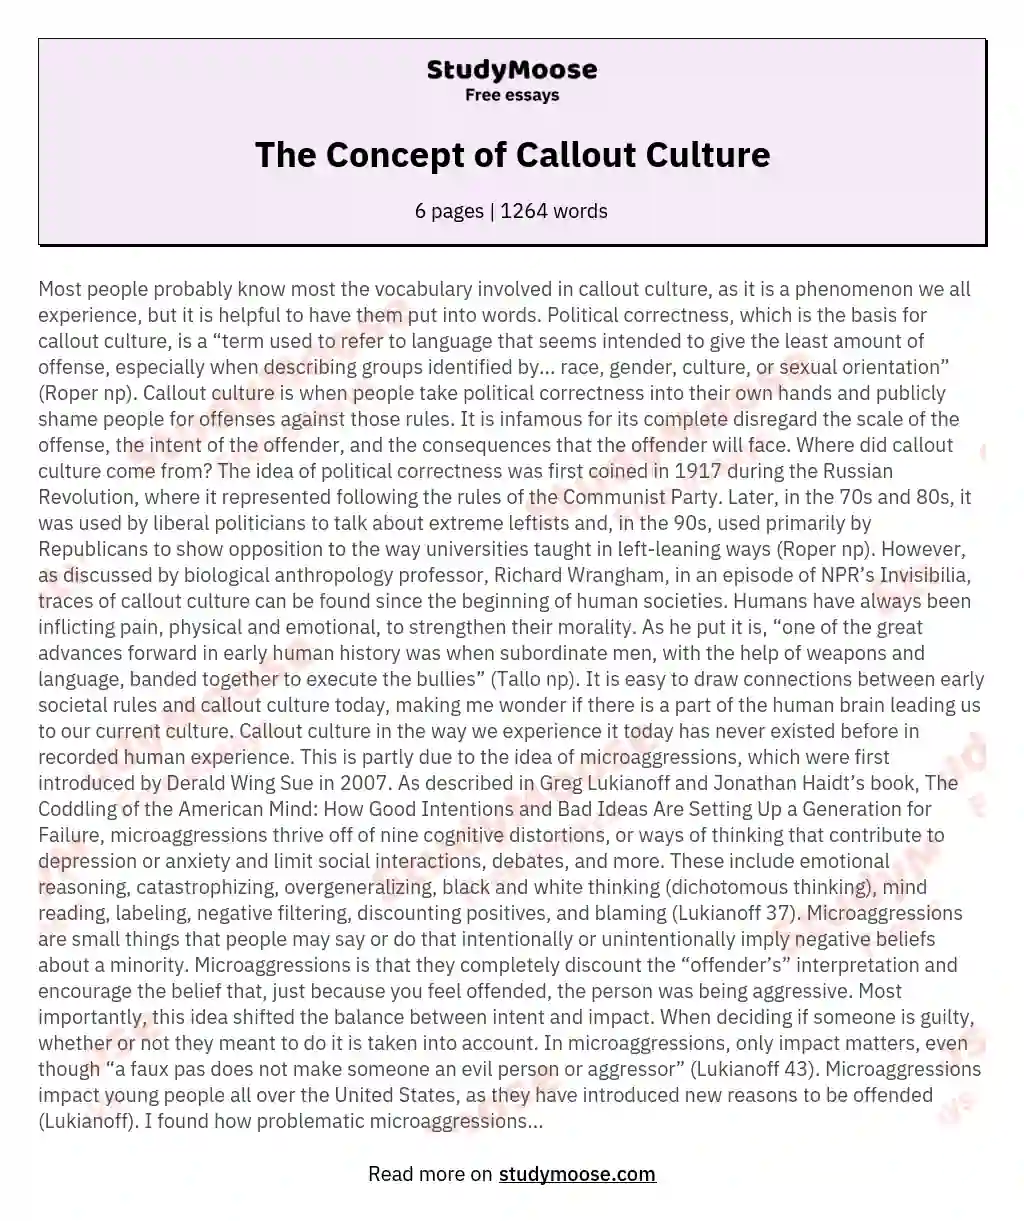 The Concept of Callout Culture